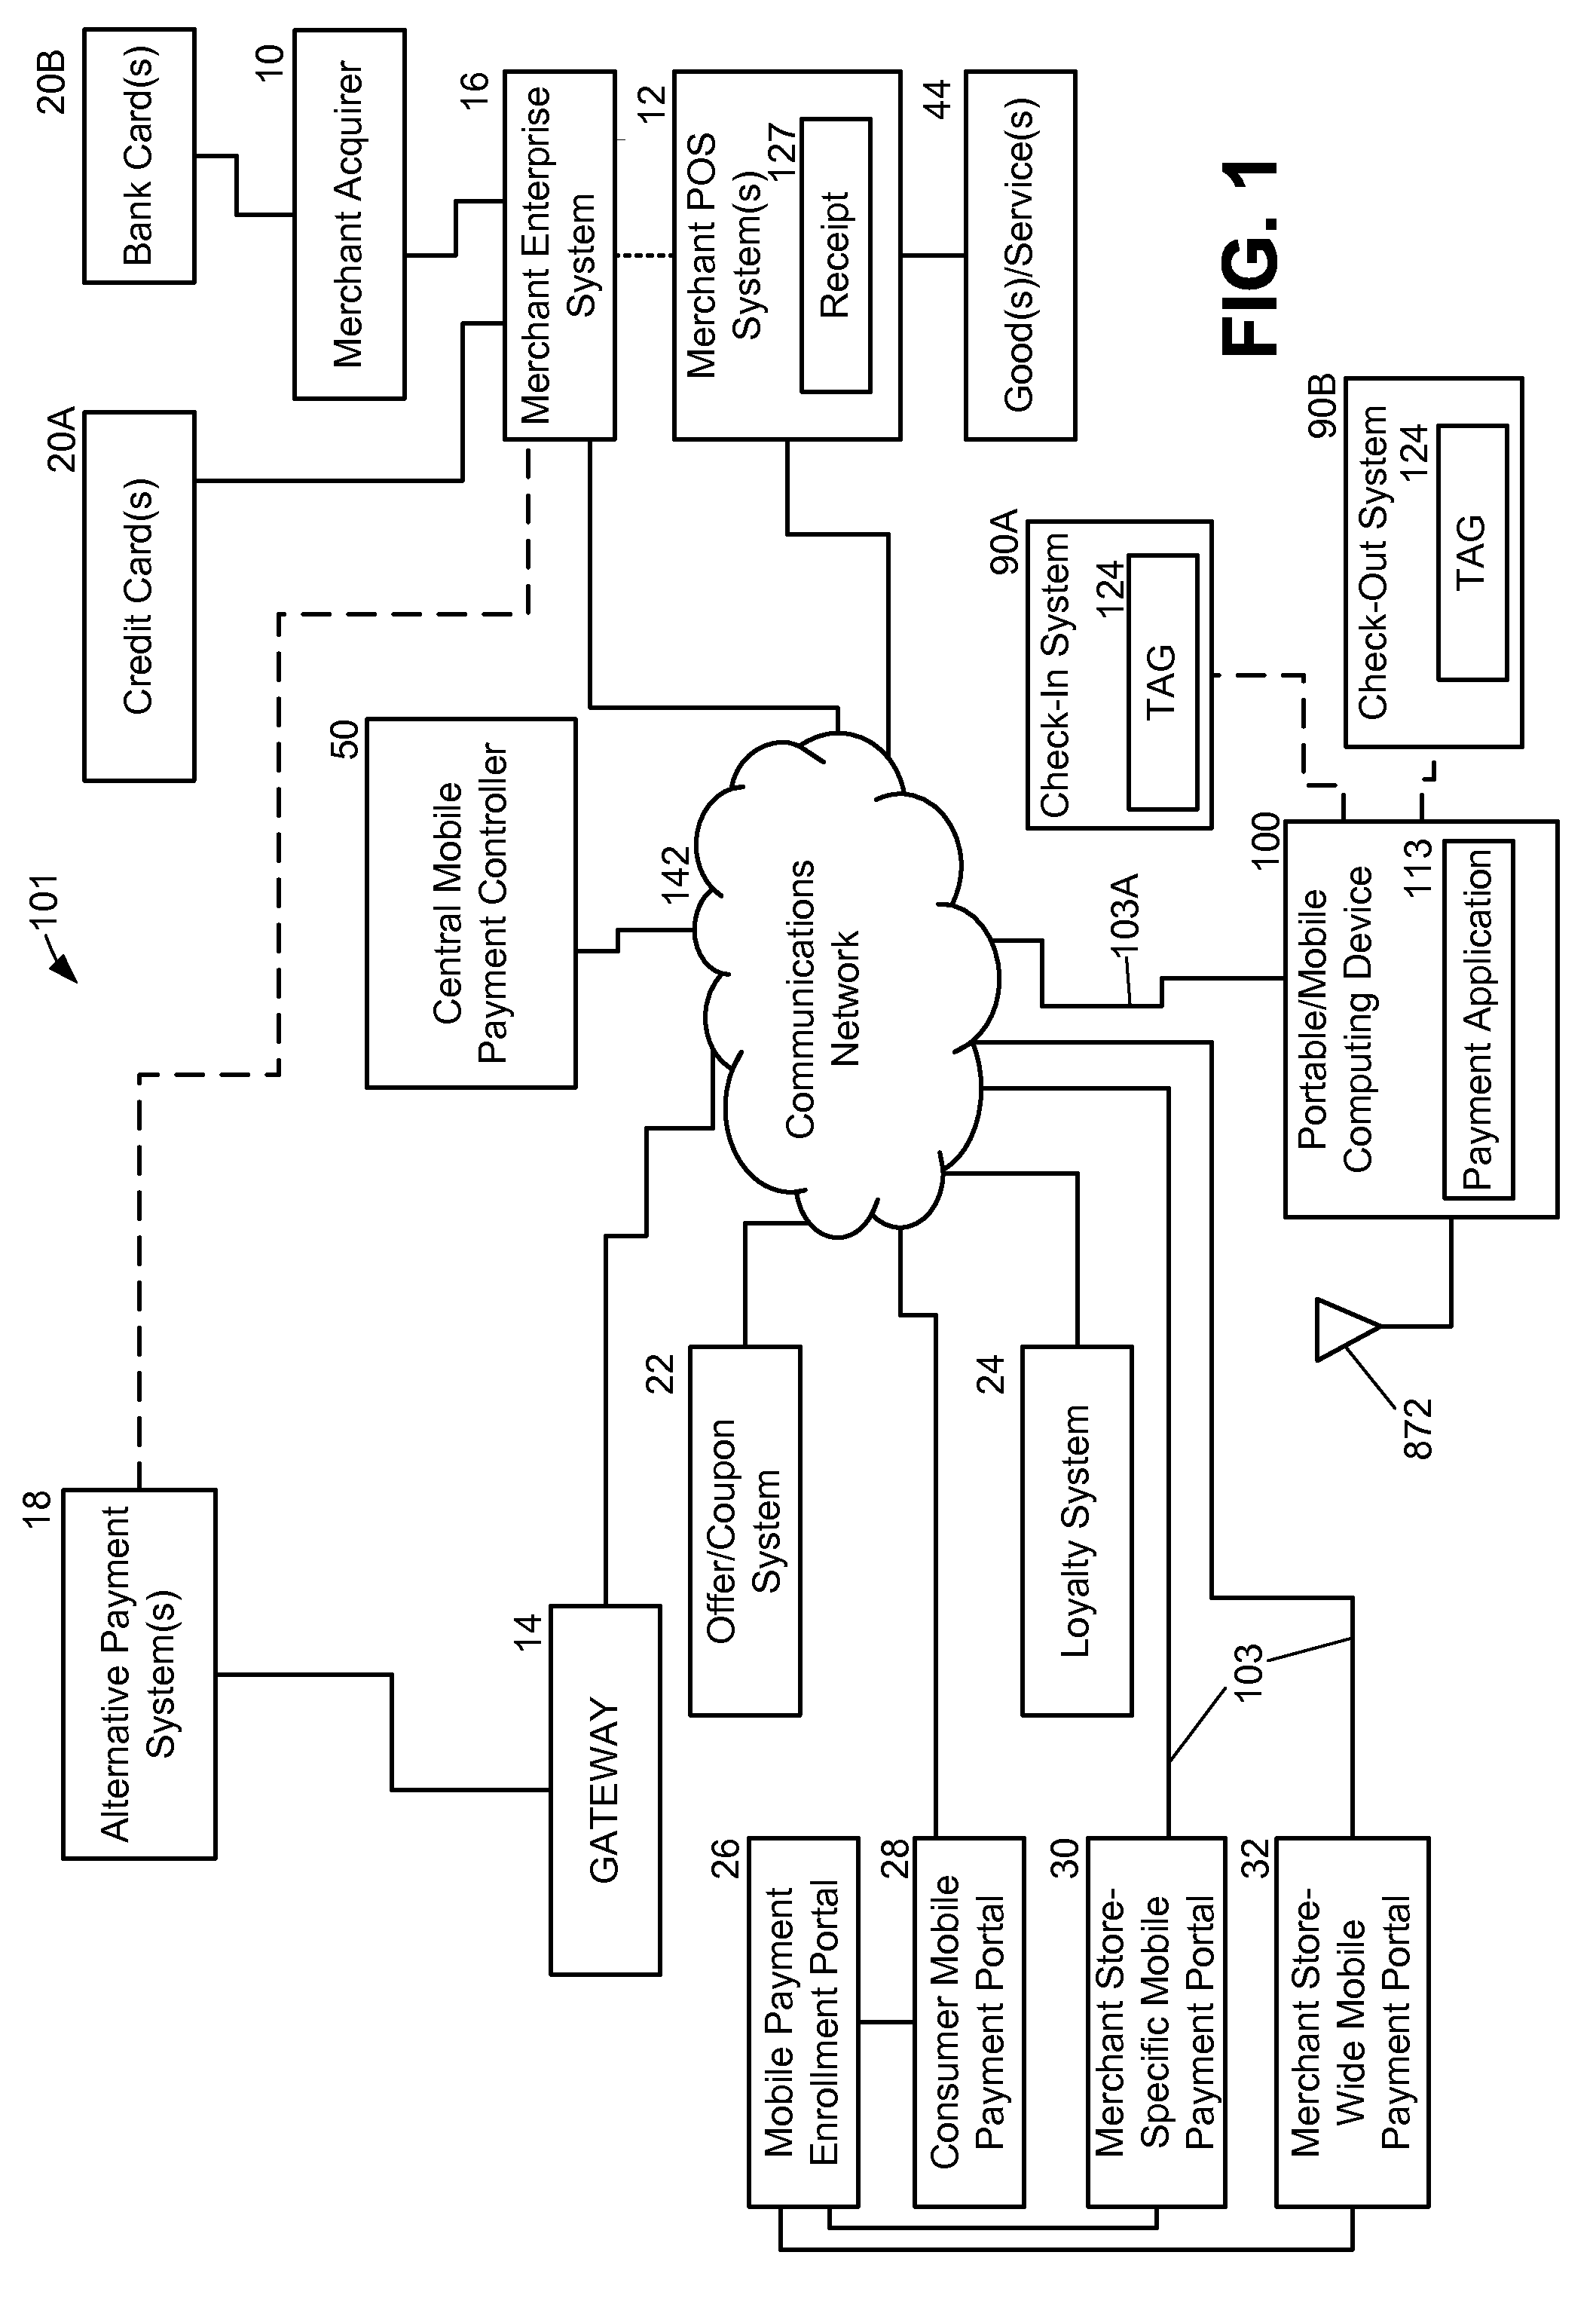 System and method for managing transactions with a portable computing device